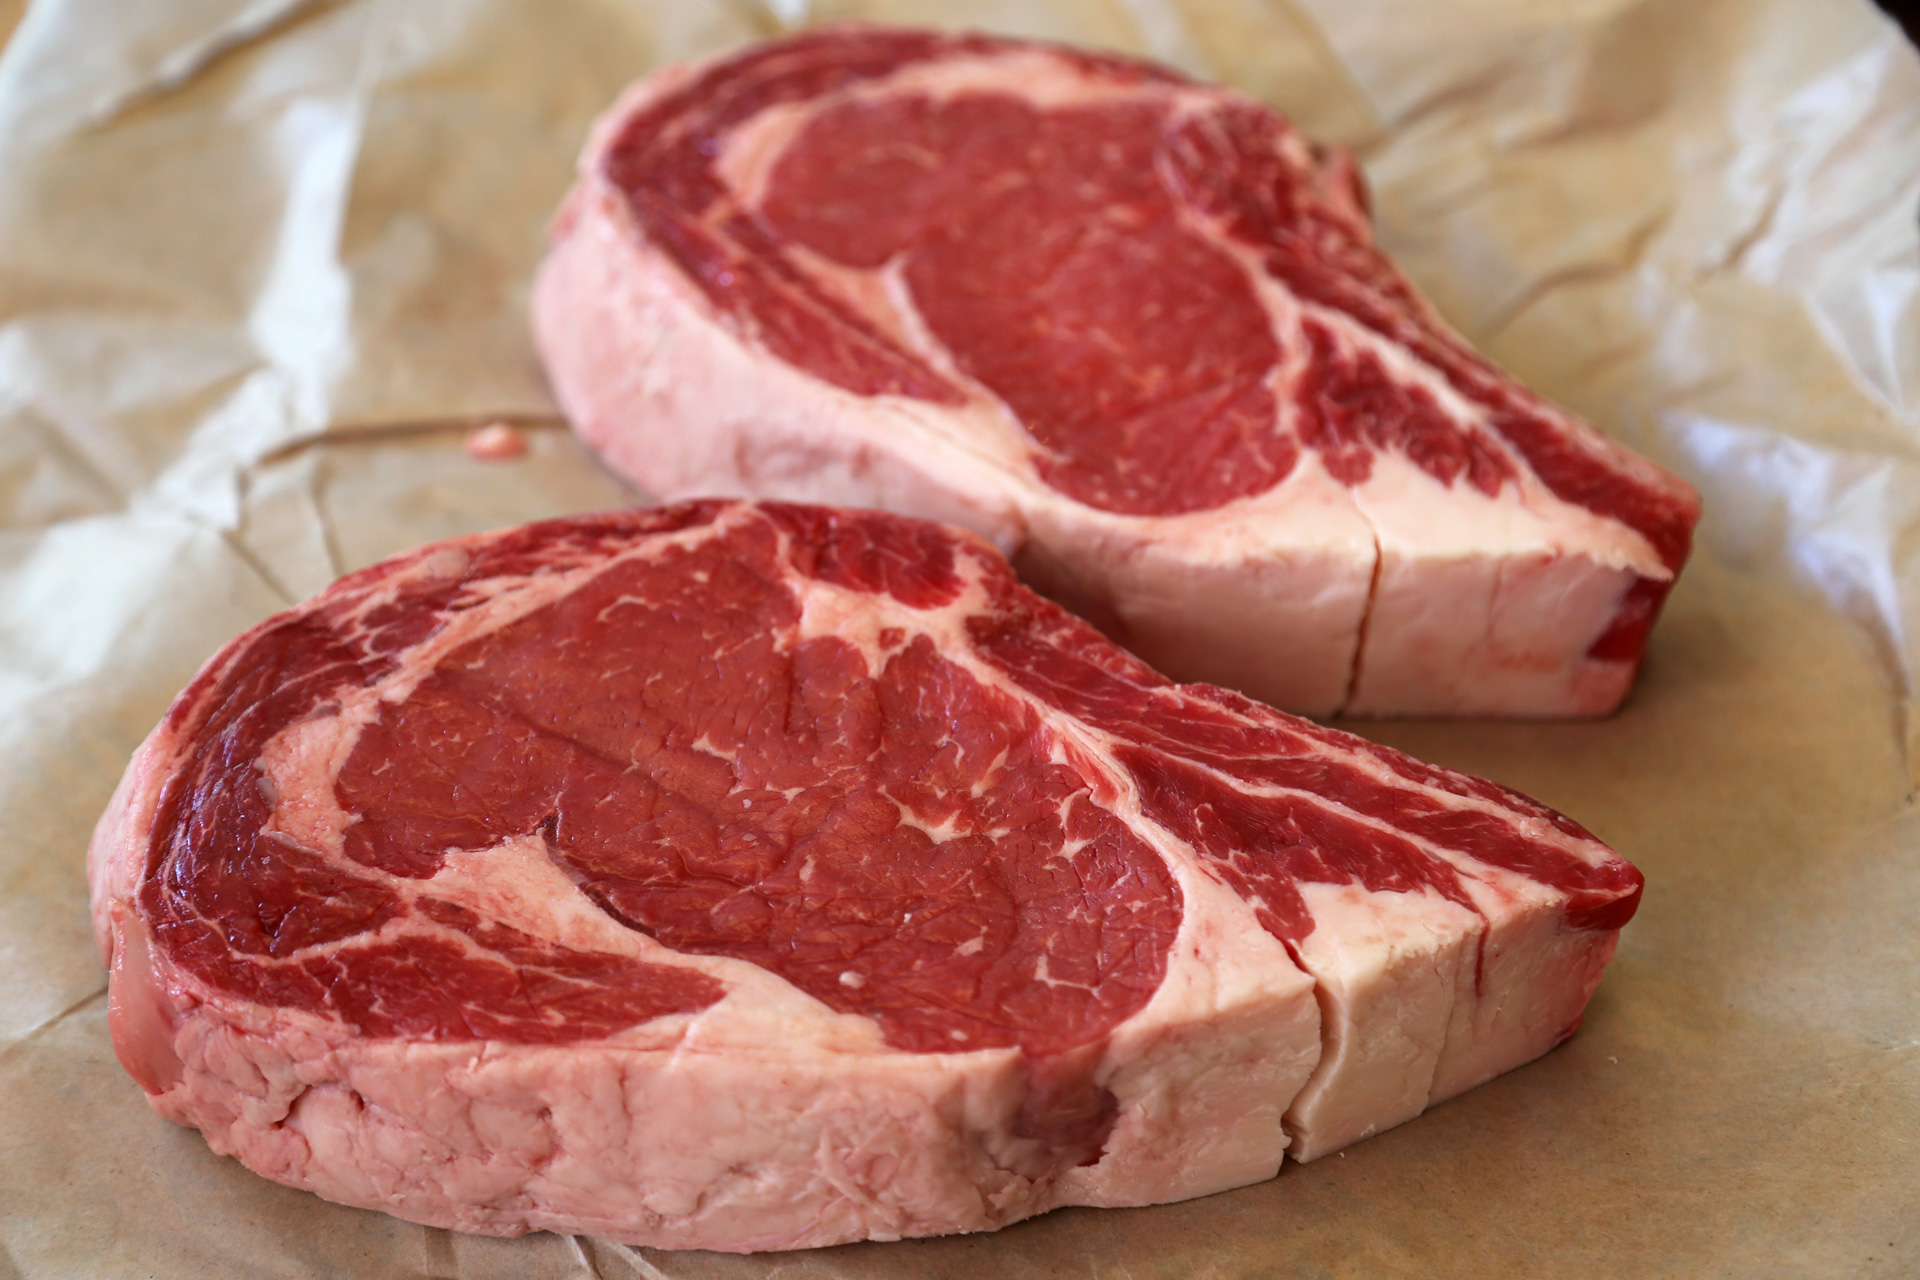 Your steak should be 1-1/2 inches thick. well-marbled and bone-in.